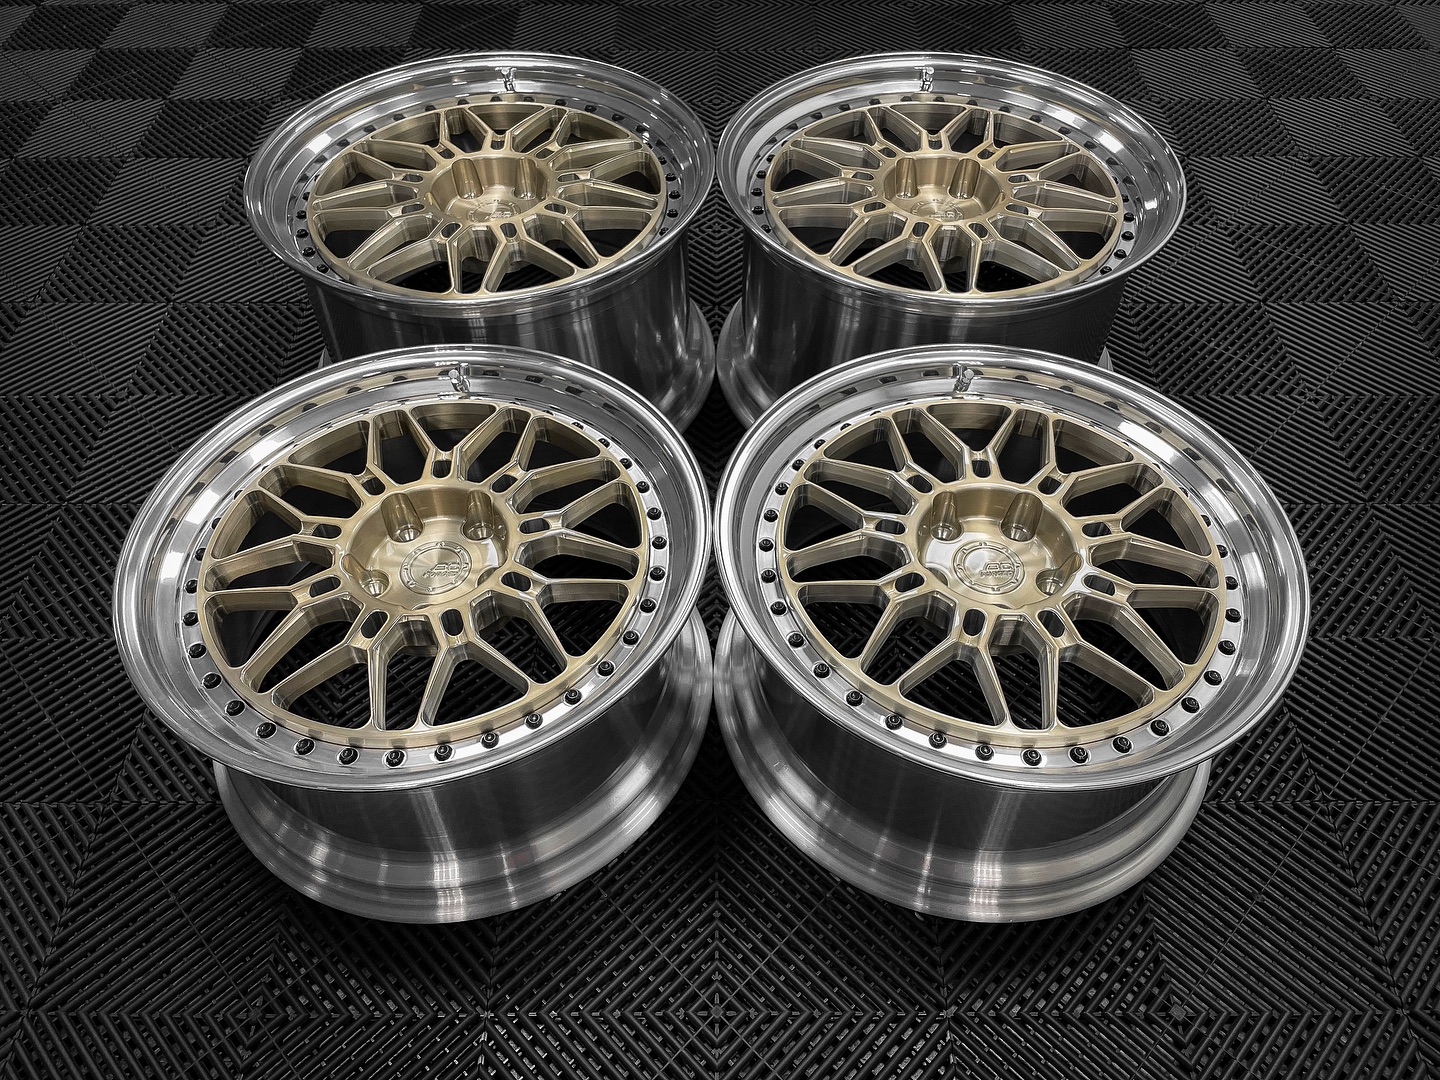 S650 Mustang Authorized Dealer BC Forged Wheels: Monoblock And Modular Series Wheels For Mustang S650 419662367_18395410906064104_8674862426898145685_n